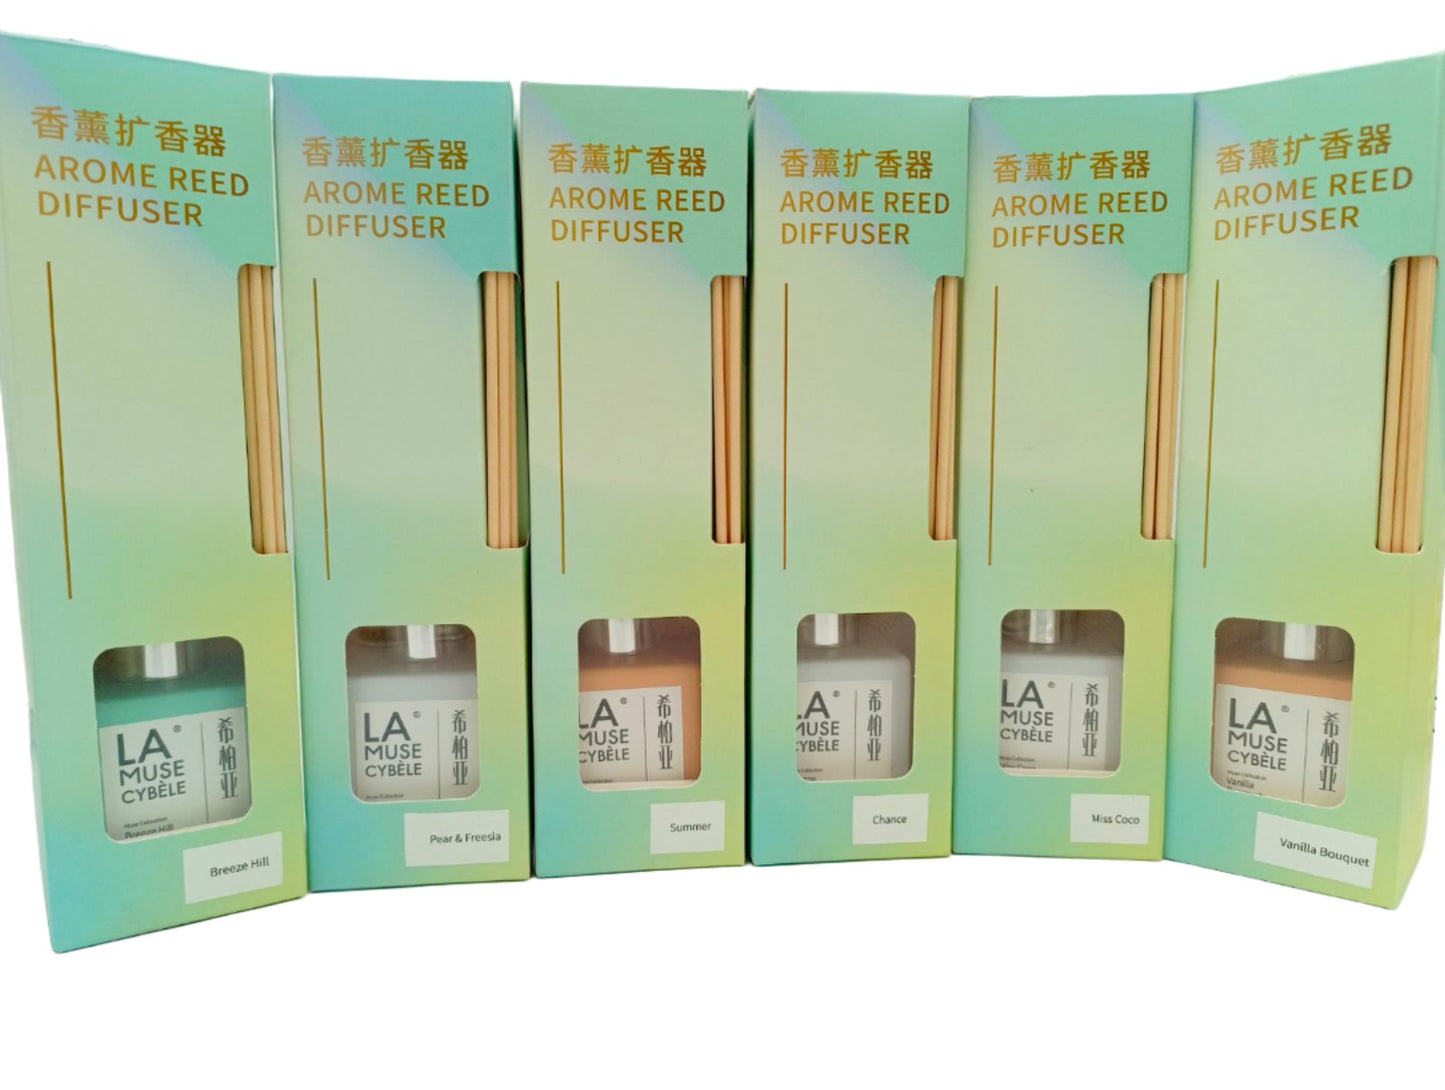 AROME REED DIFFUSER (50ML)